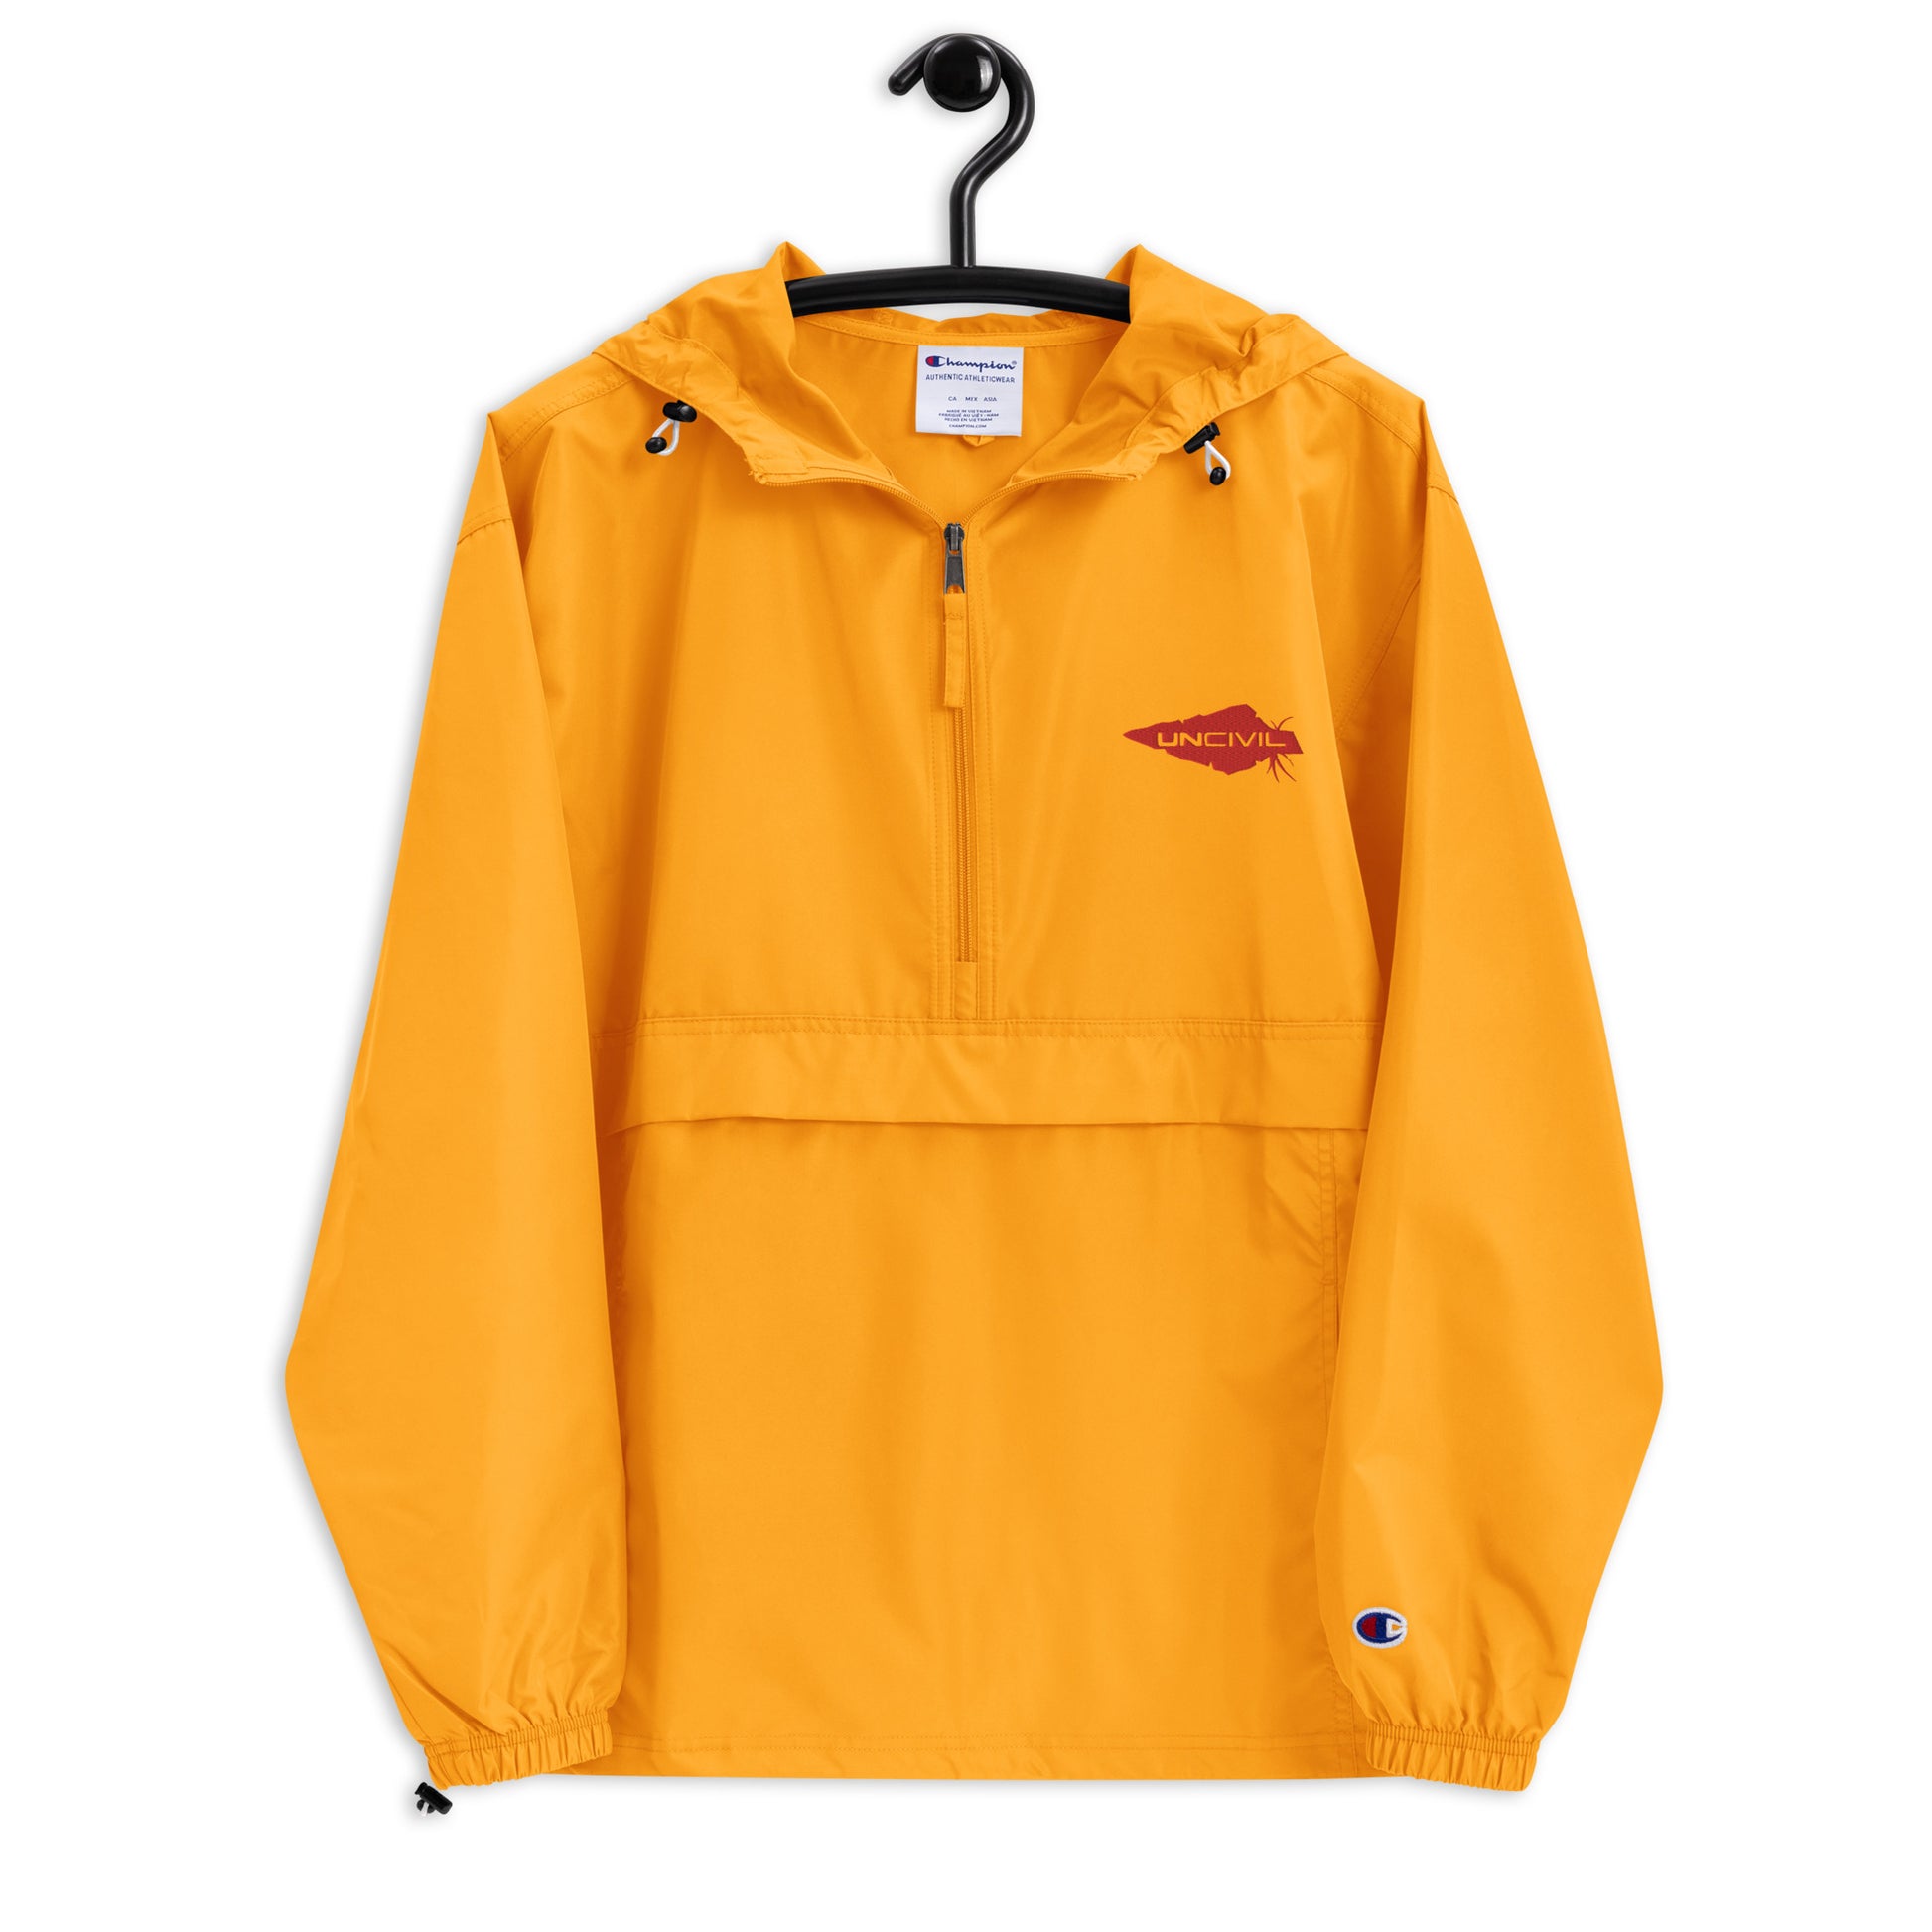 Wind and rain resistant hoodie packable champion and UNCIVIL Jacket in gold orange with our red embroidered spear logo